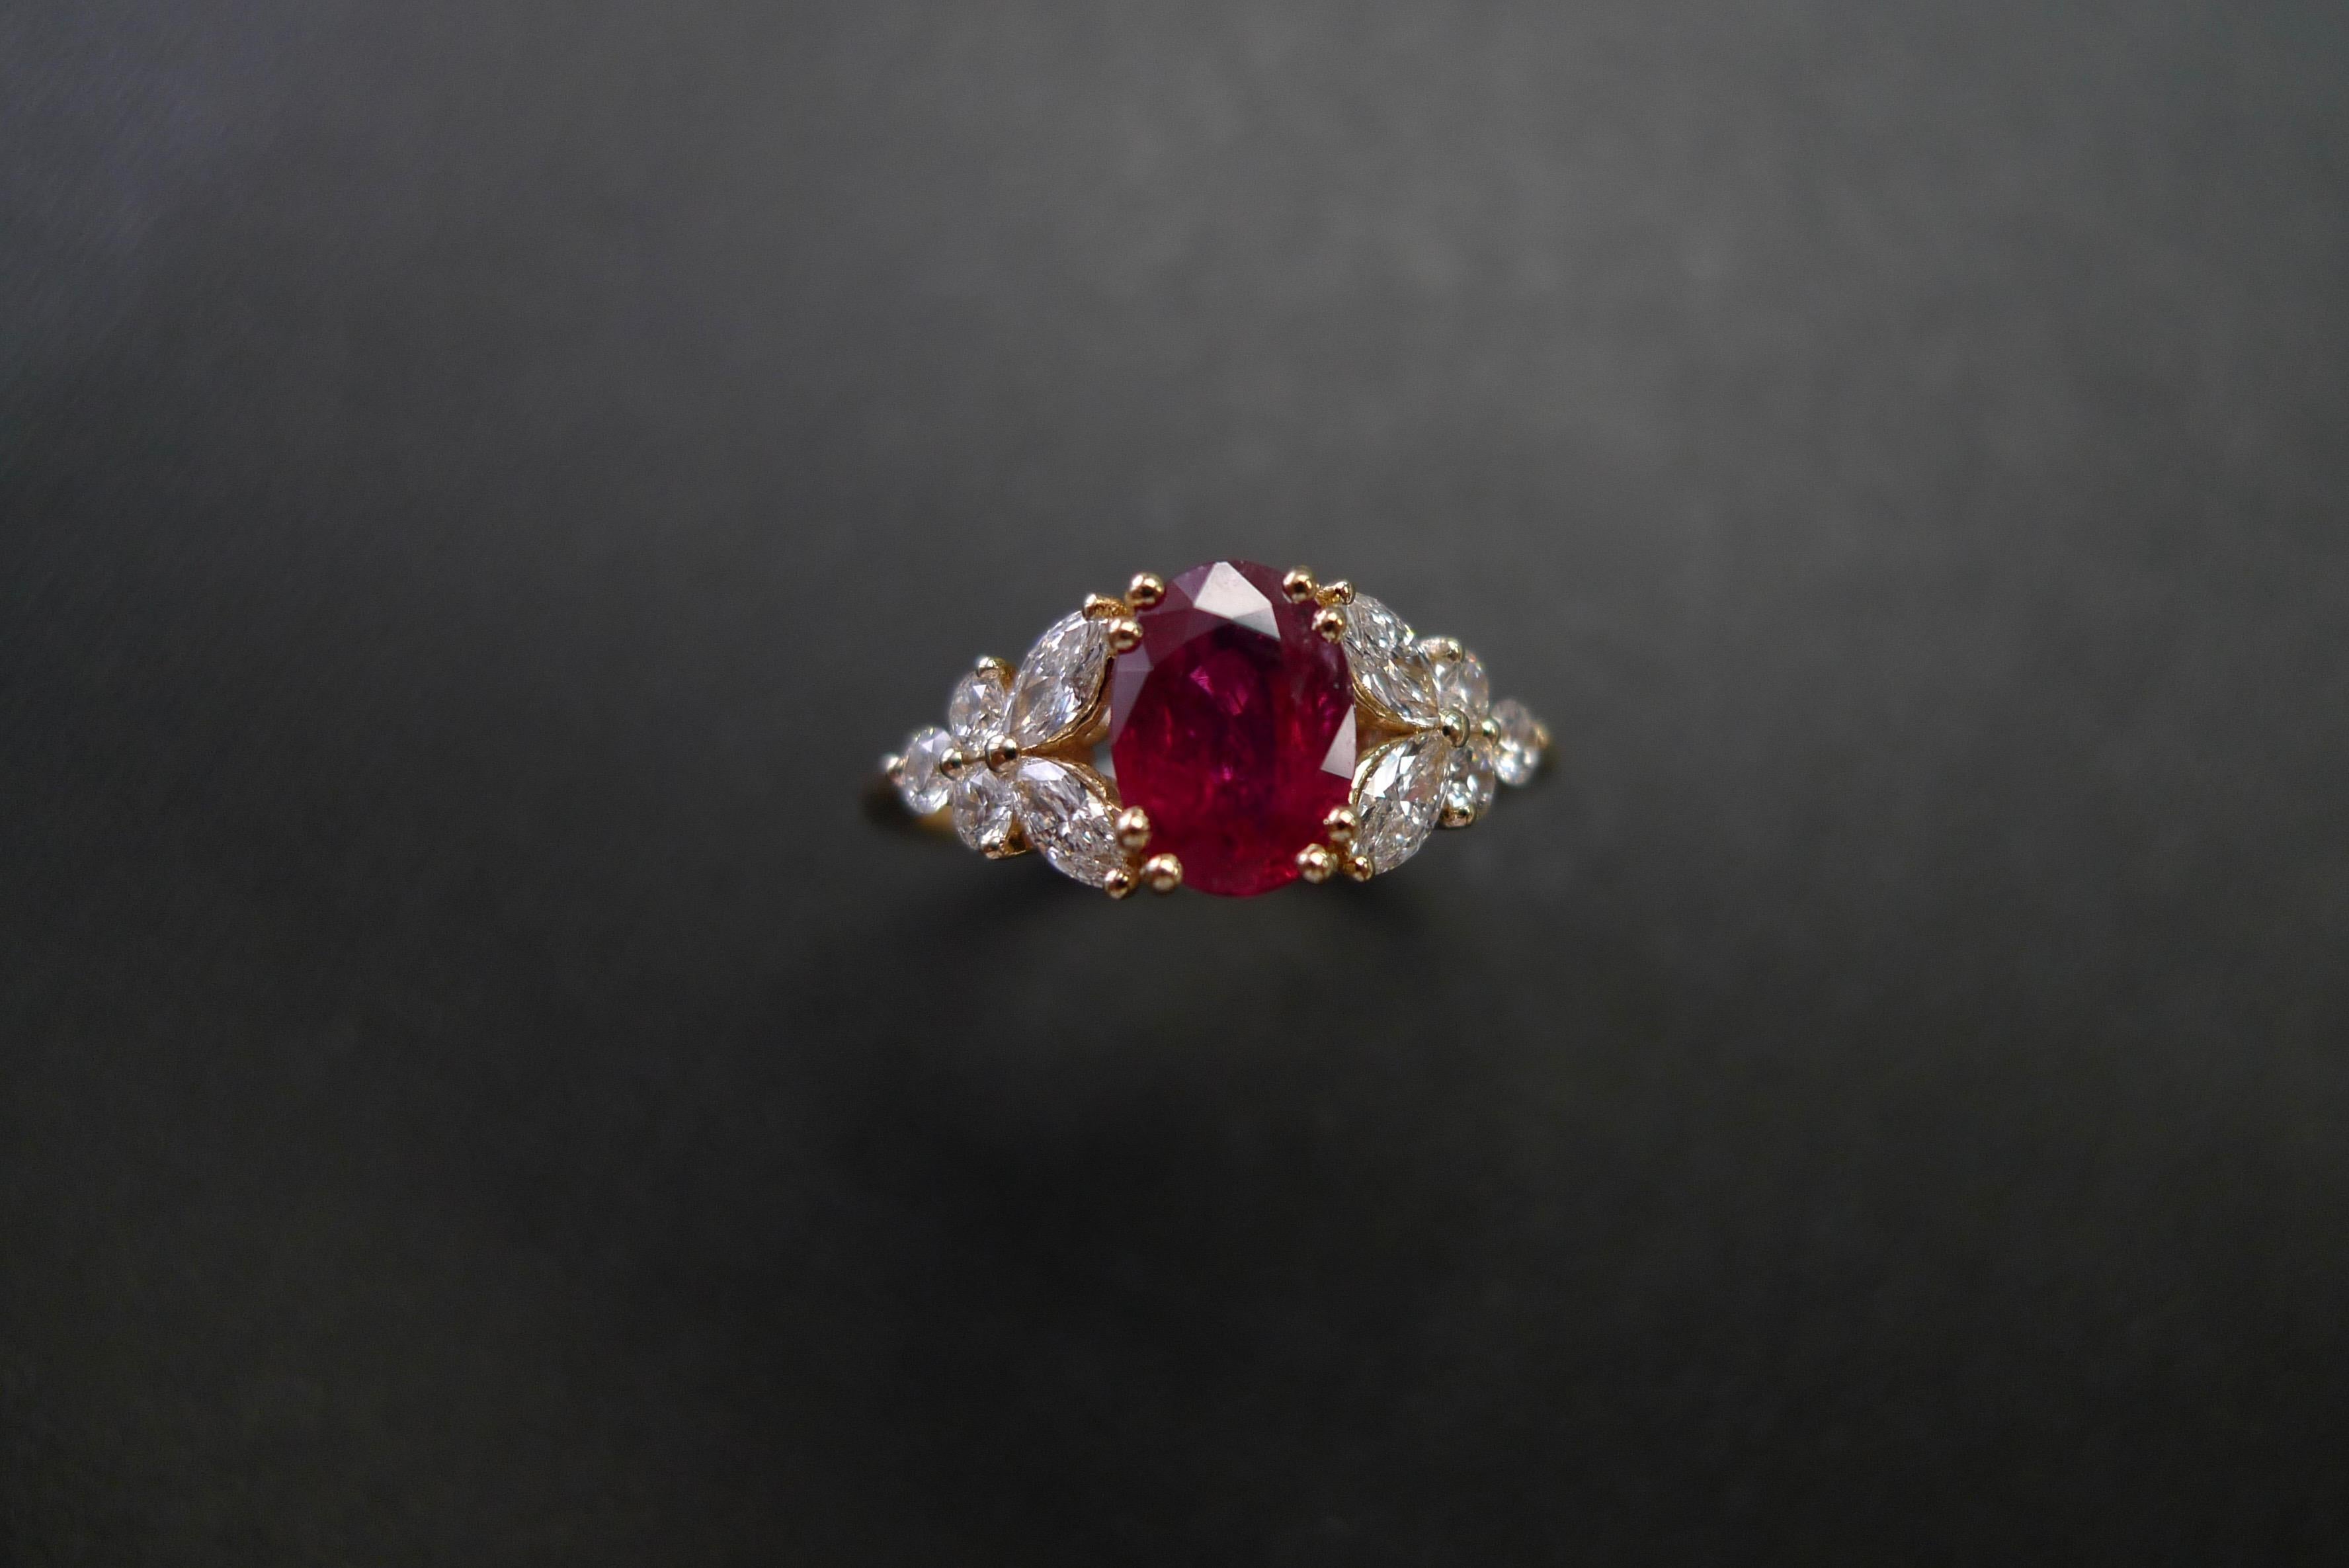 For Sale:  Natural Genuine Ruby and Marquise Diamonds Ring Made in 14k Yellow Gold  10